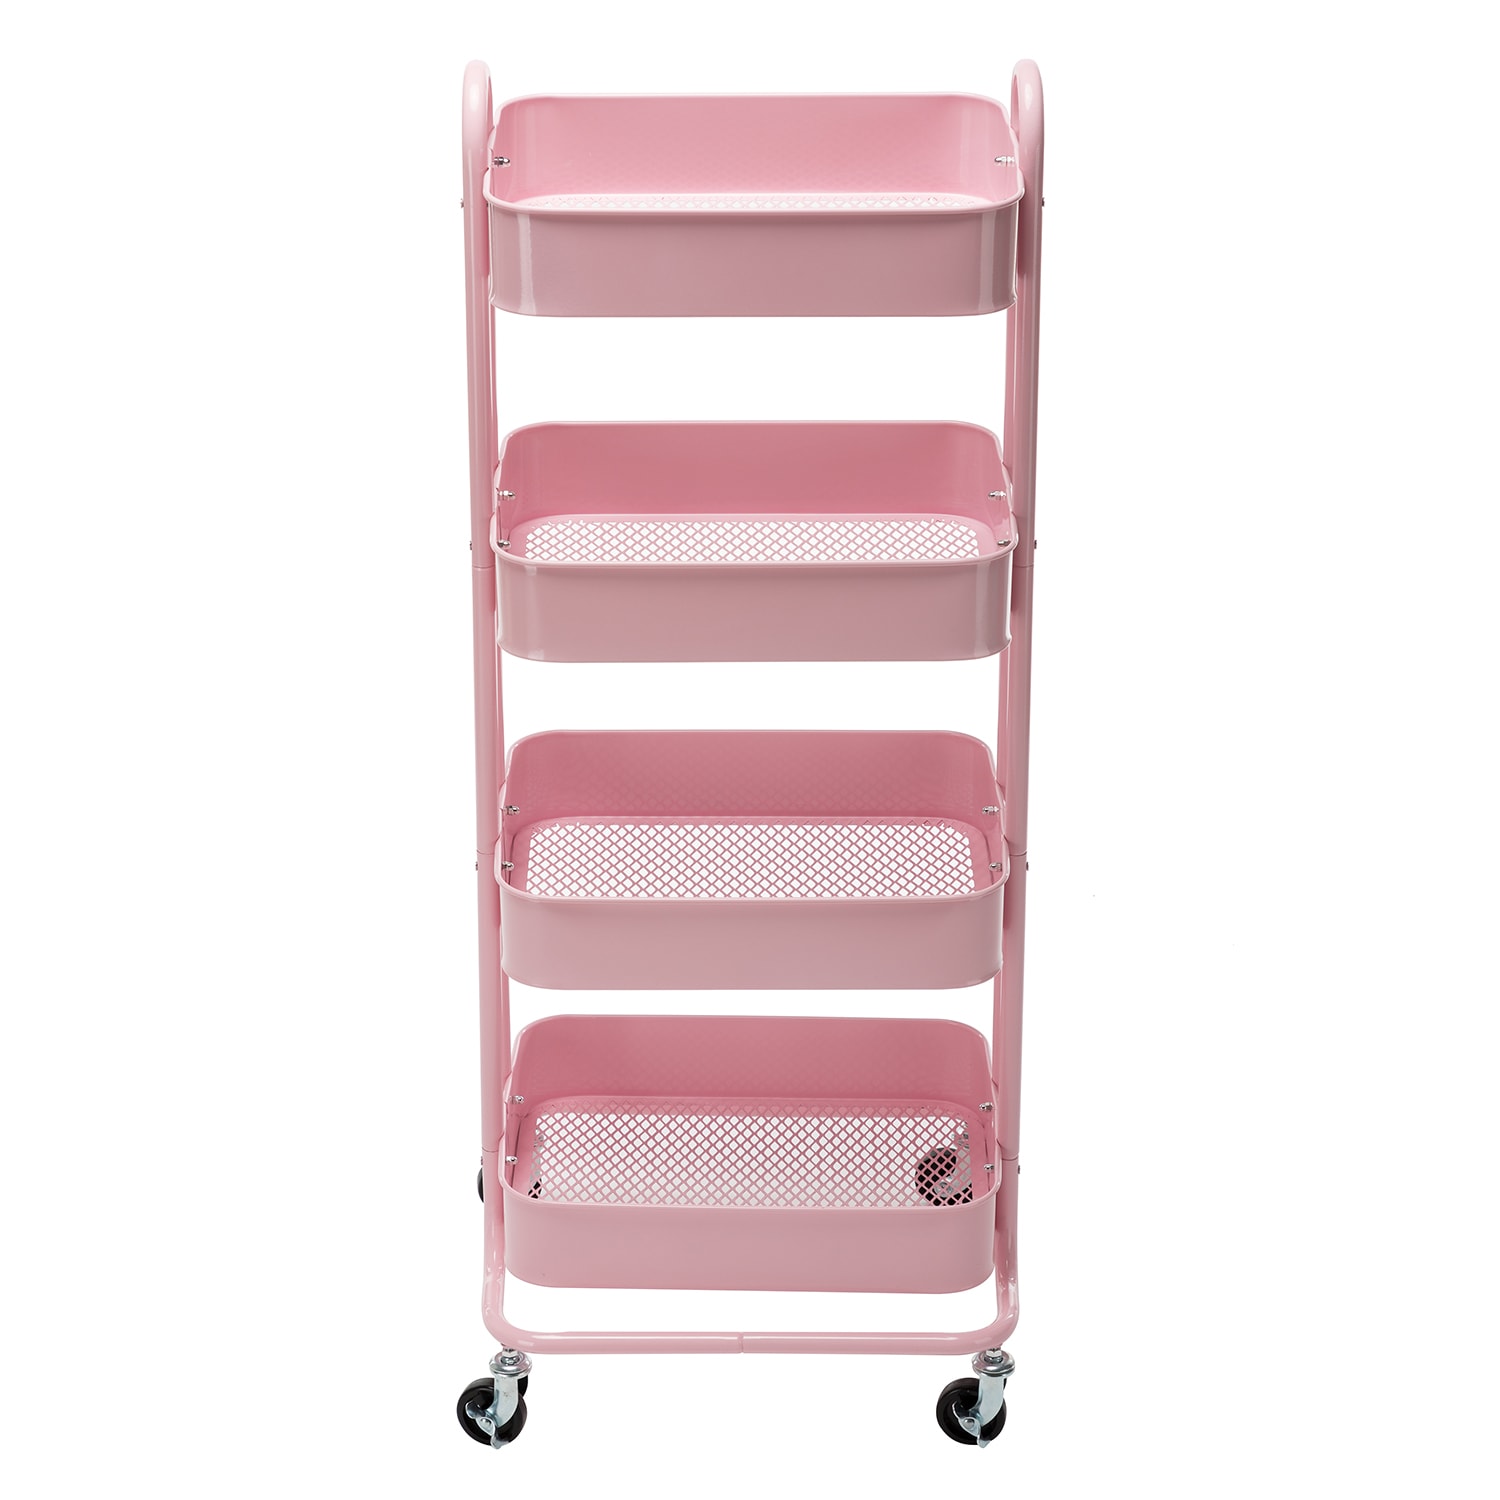 Flynama 4 Tier Pink Metal Utility Cart, Cart With Wheels And Shelves